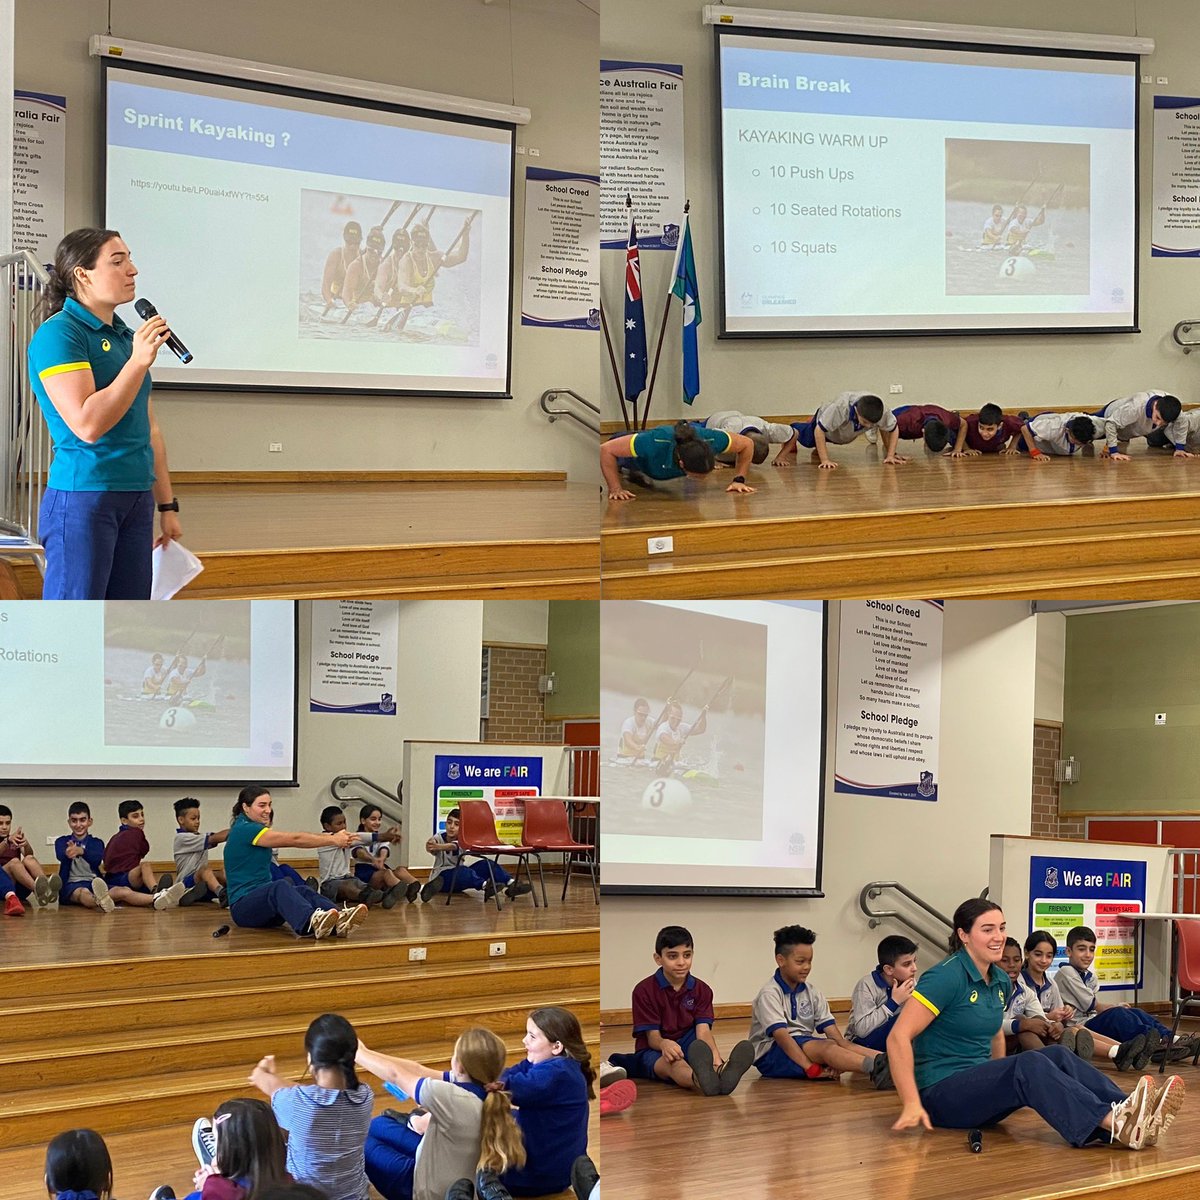 Today Fairvale had the honour of hosting Olympian Jasmine Locke! Jasmine, a sprint kayaker, captivated our students with her inspiring journey of resilience, and shared invaluable tips on goal-setting for success. 🚣🏻‍♀️🏆🏅 #OlympicsUnleashed @AUSOlympicTeam @AnthonyPitt4